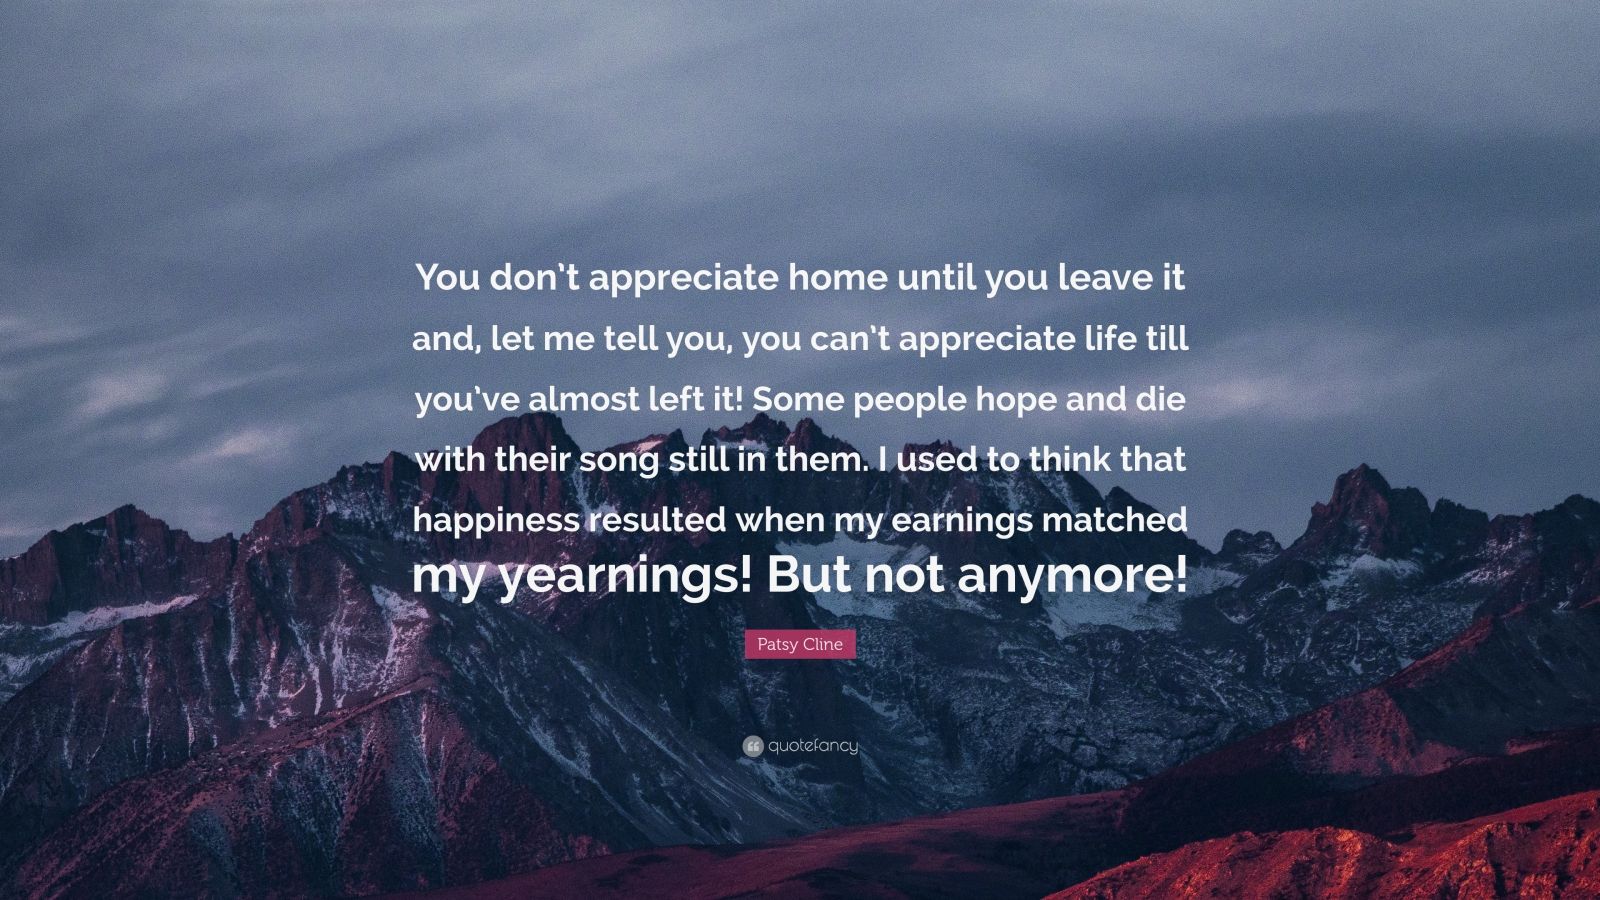 Patsy Cline Quote: “You don’t appreciate home until you leave it and ...